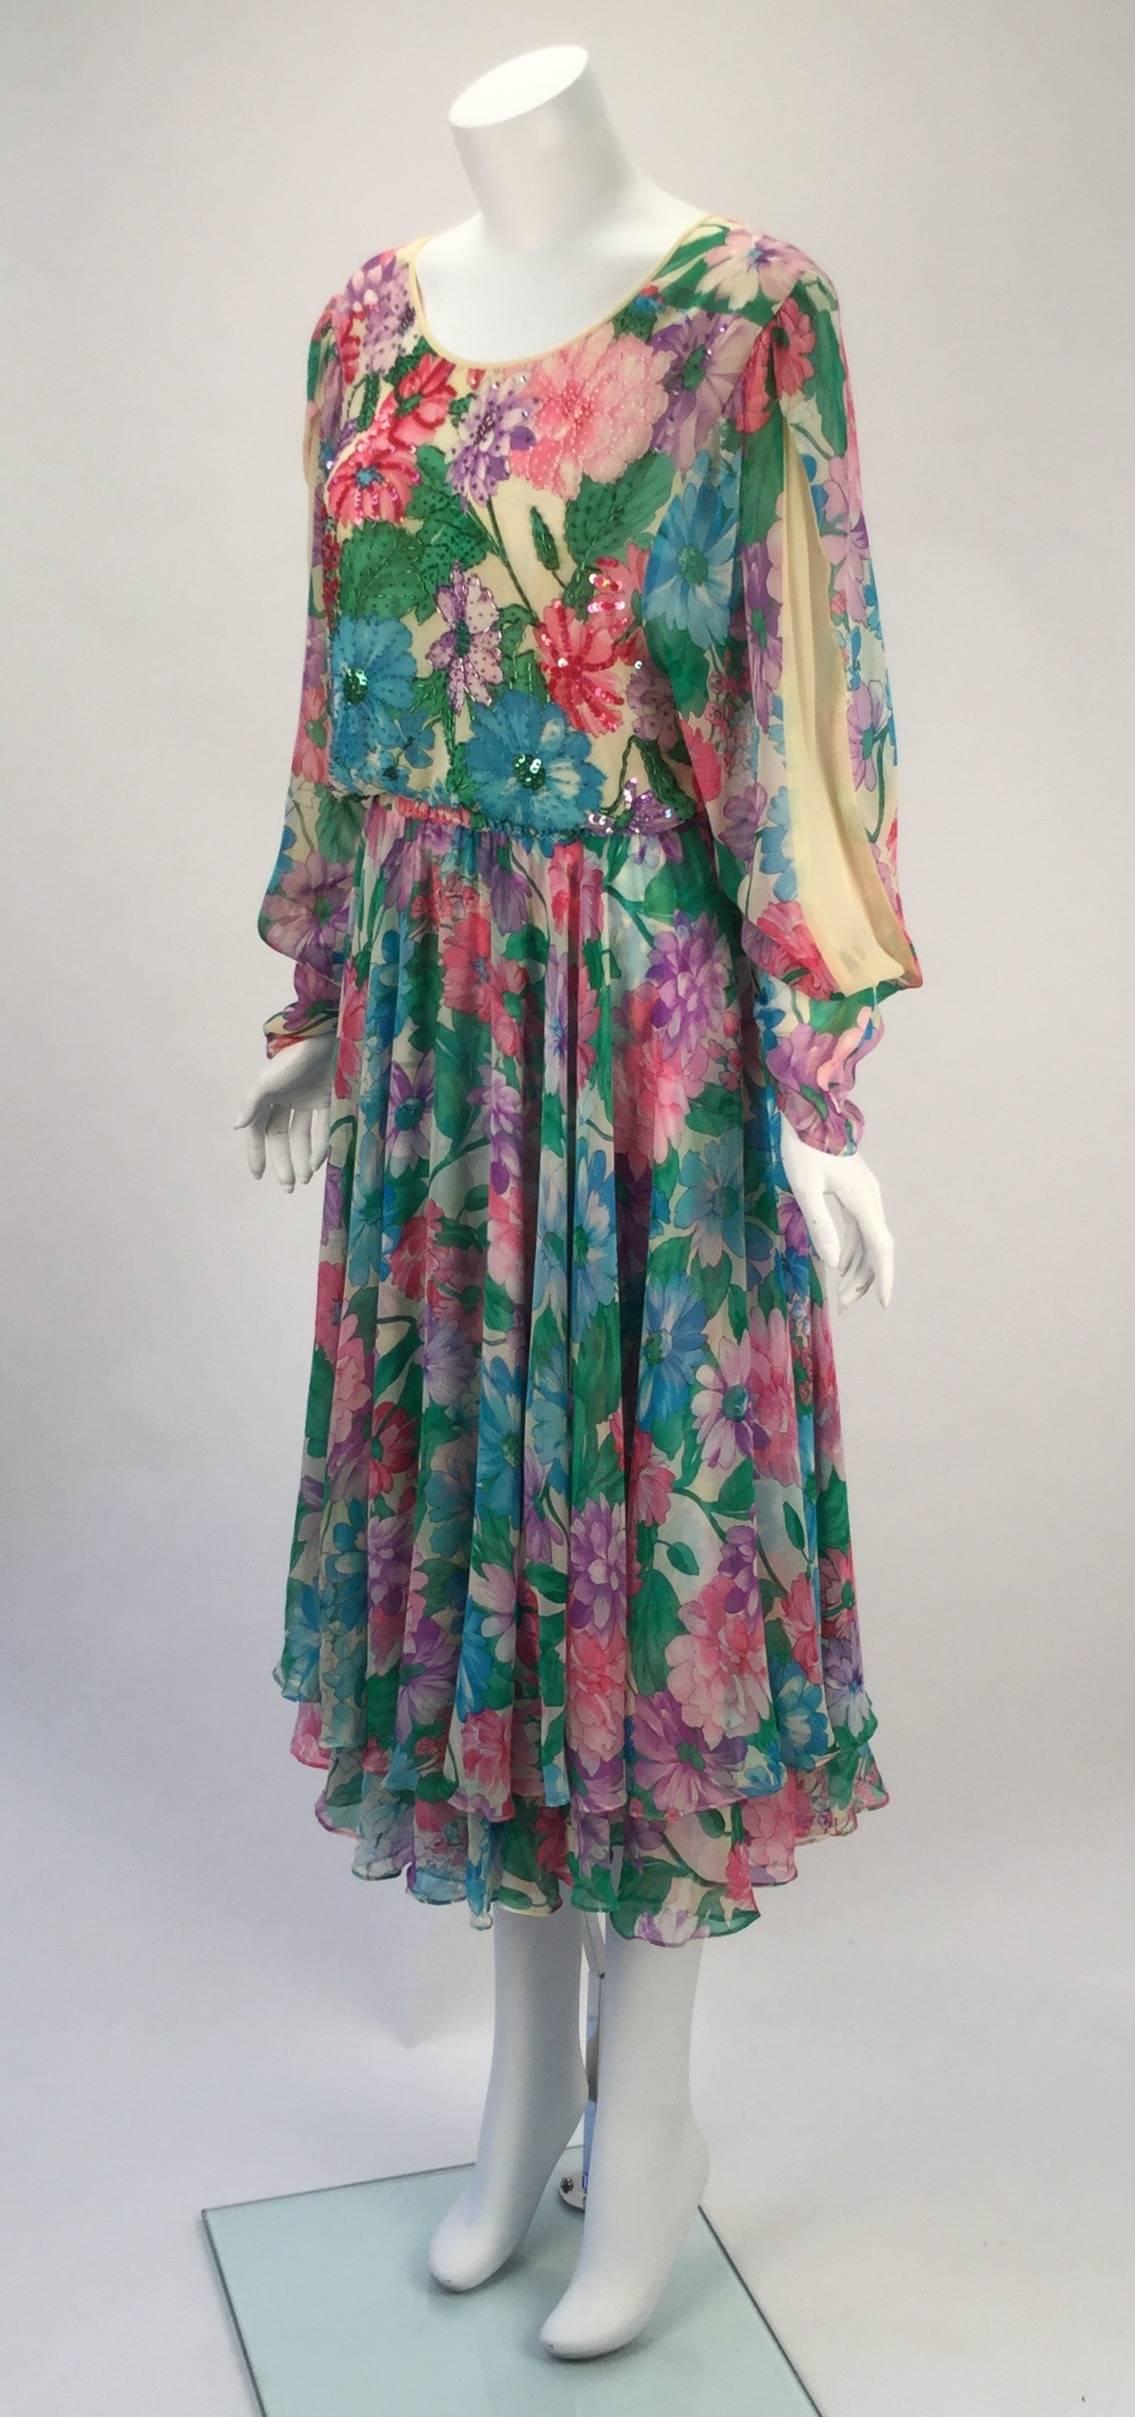 Gray 1980s Diane Freis Silk Long Sleeve Multicolor Floral Dress with Beadwork